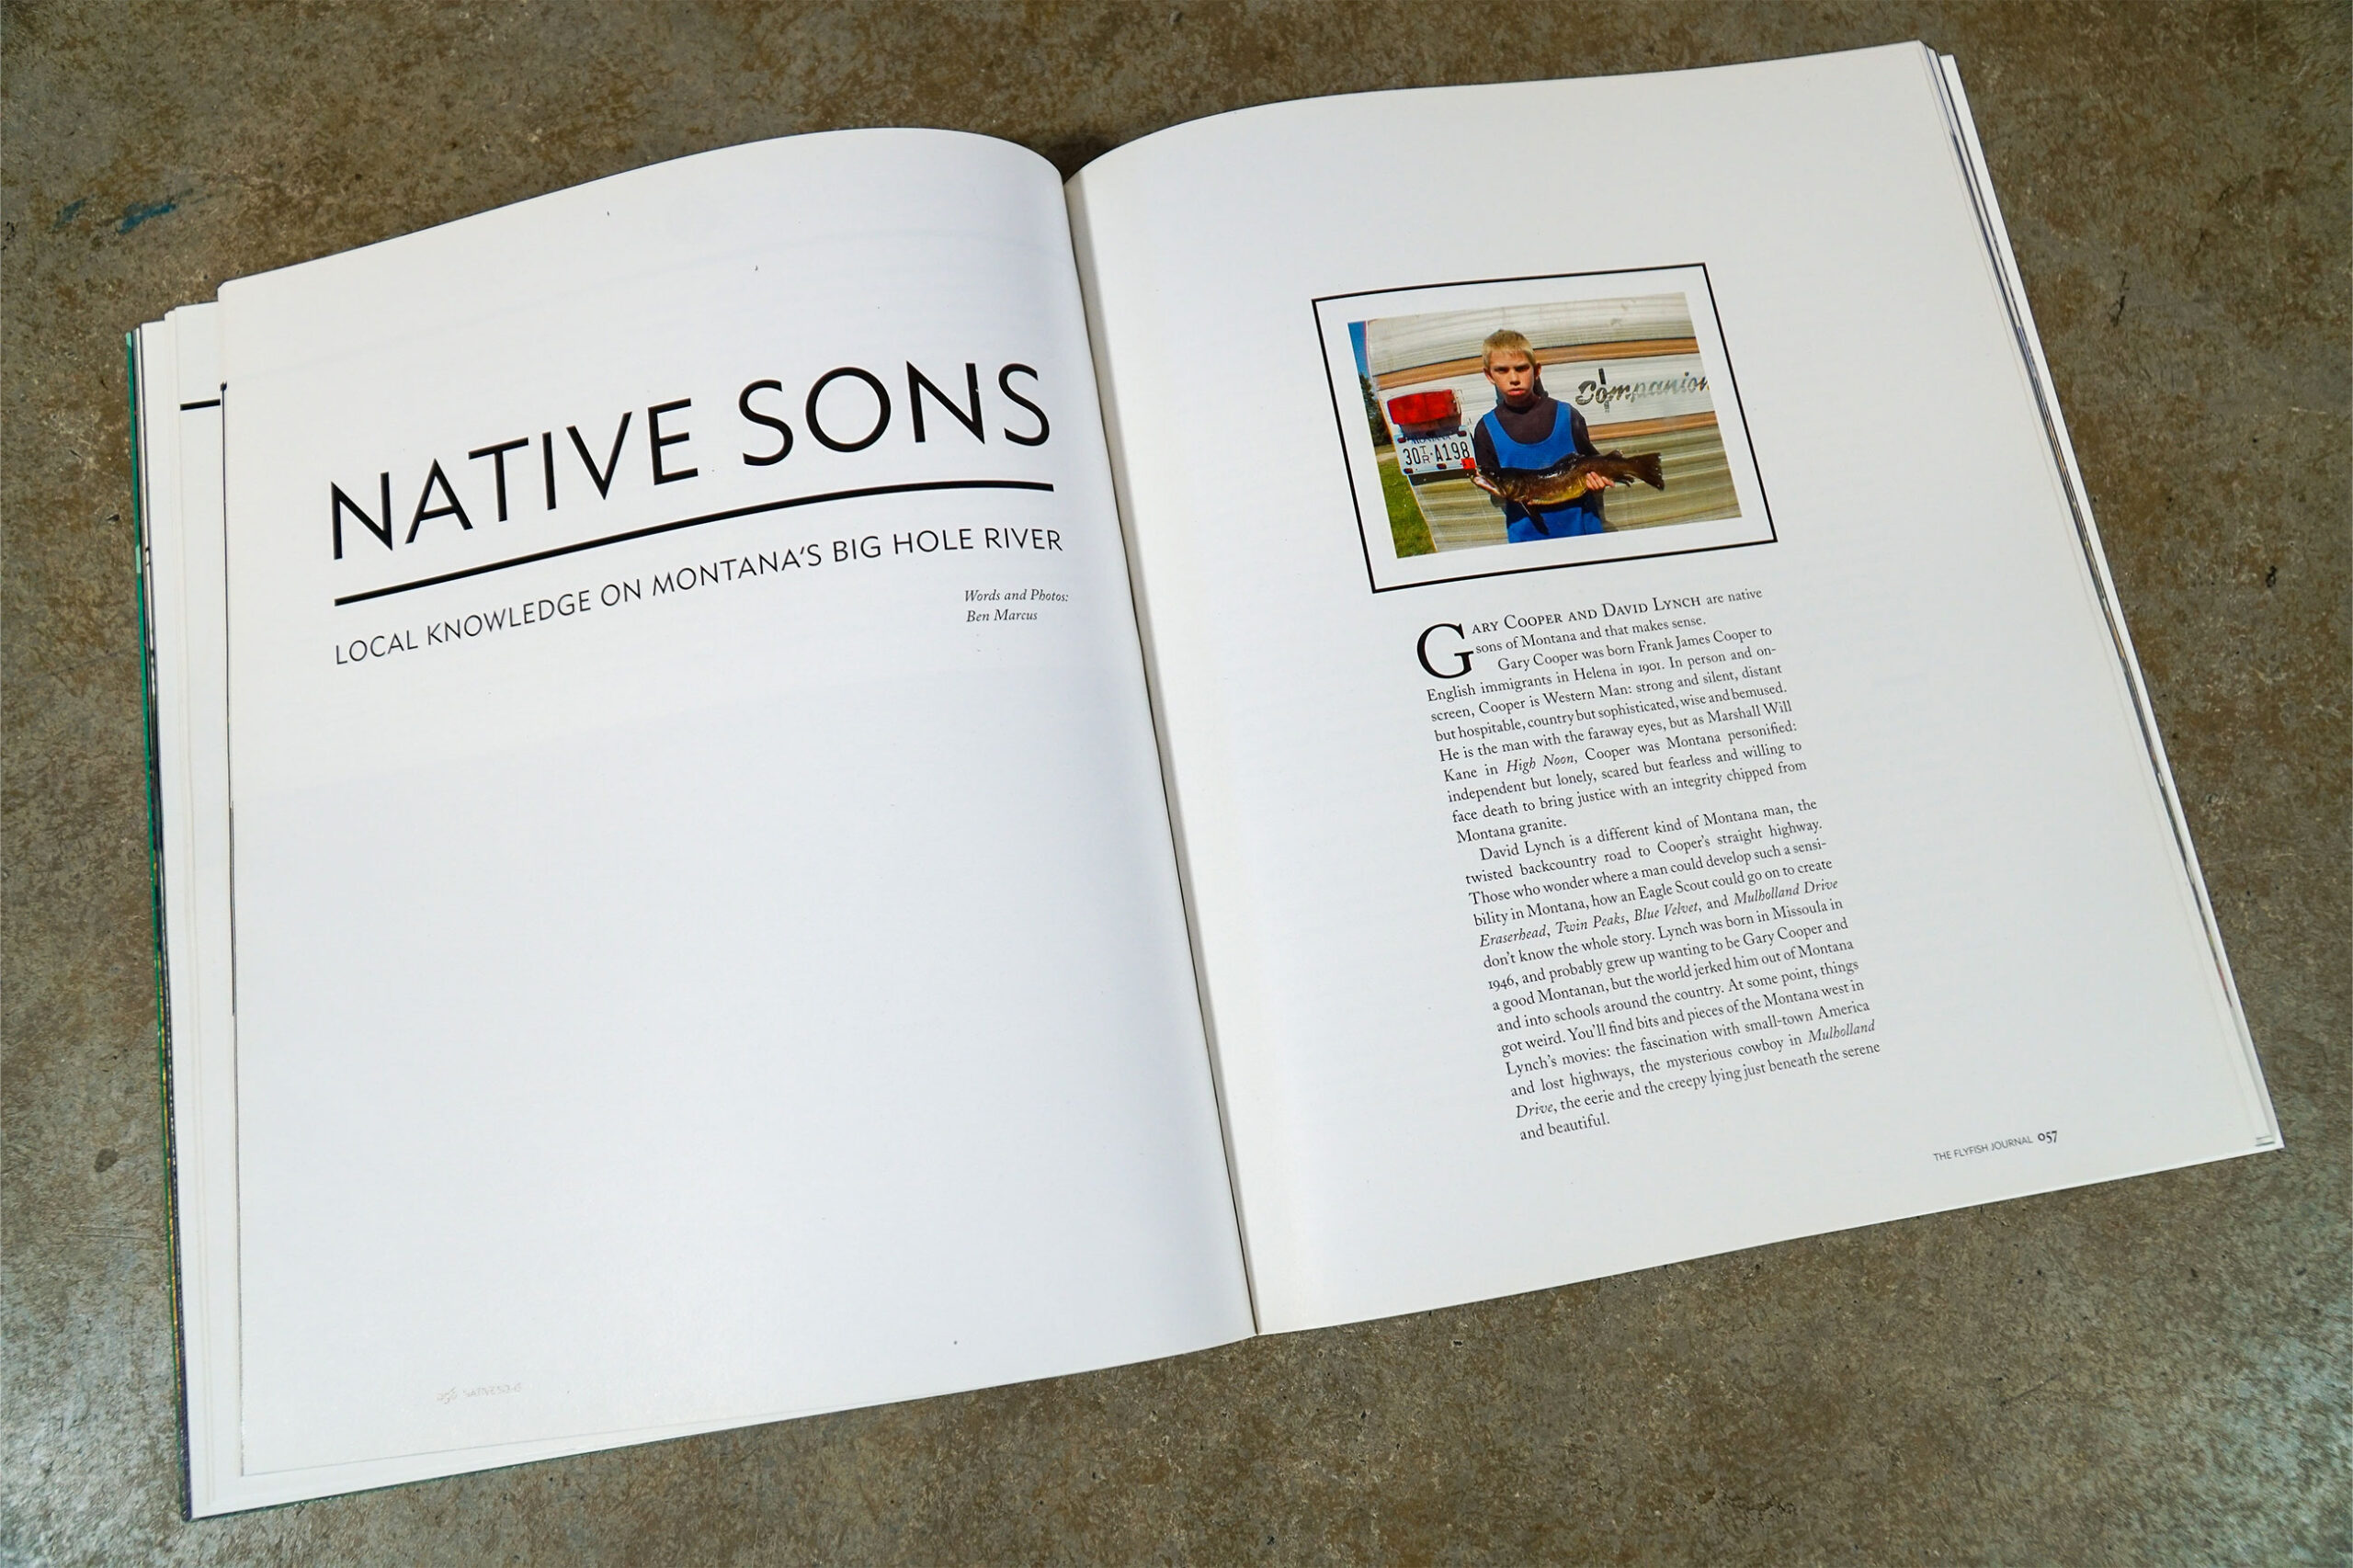 The Flyfish Journal Volume 1 Issue 1 Feature Native Sons